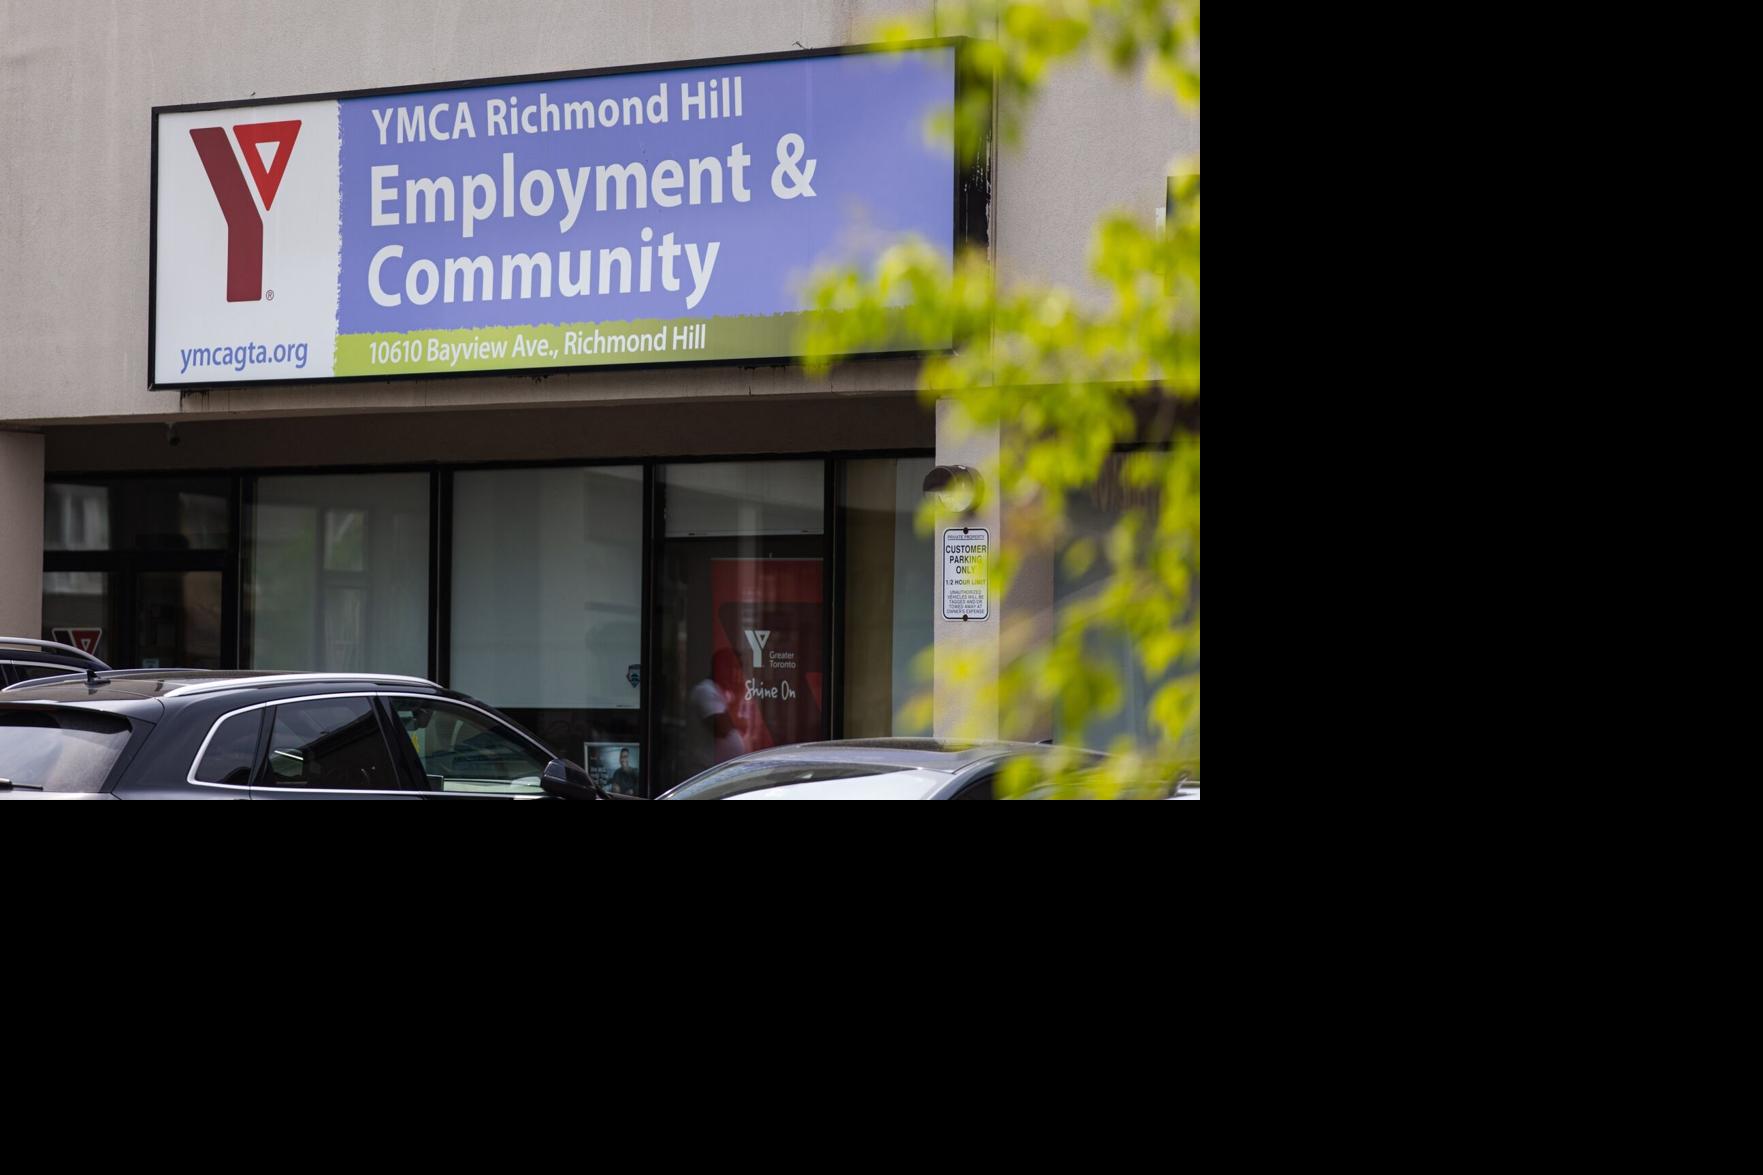 More than $2 million in government grant money was allegedly stolen from the YMCA. The charity says it was an inside job